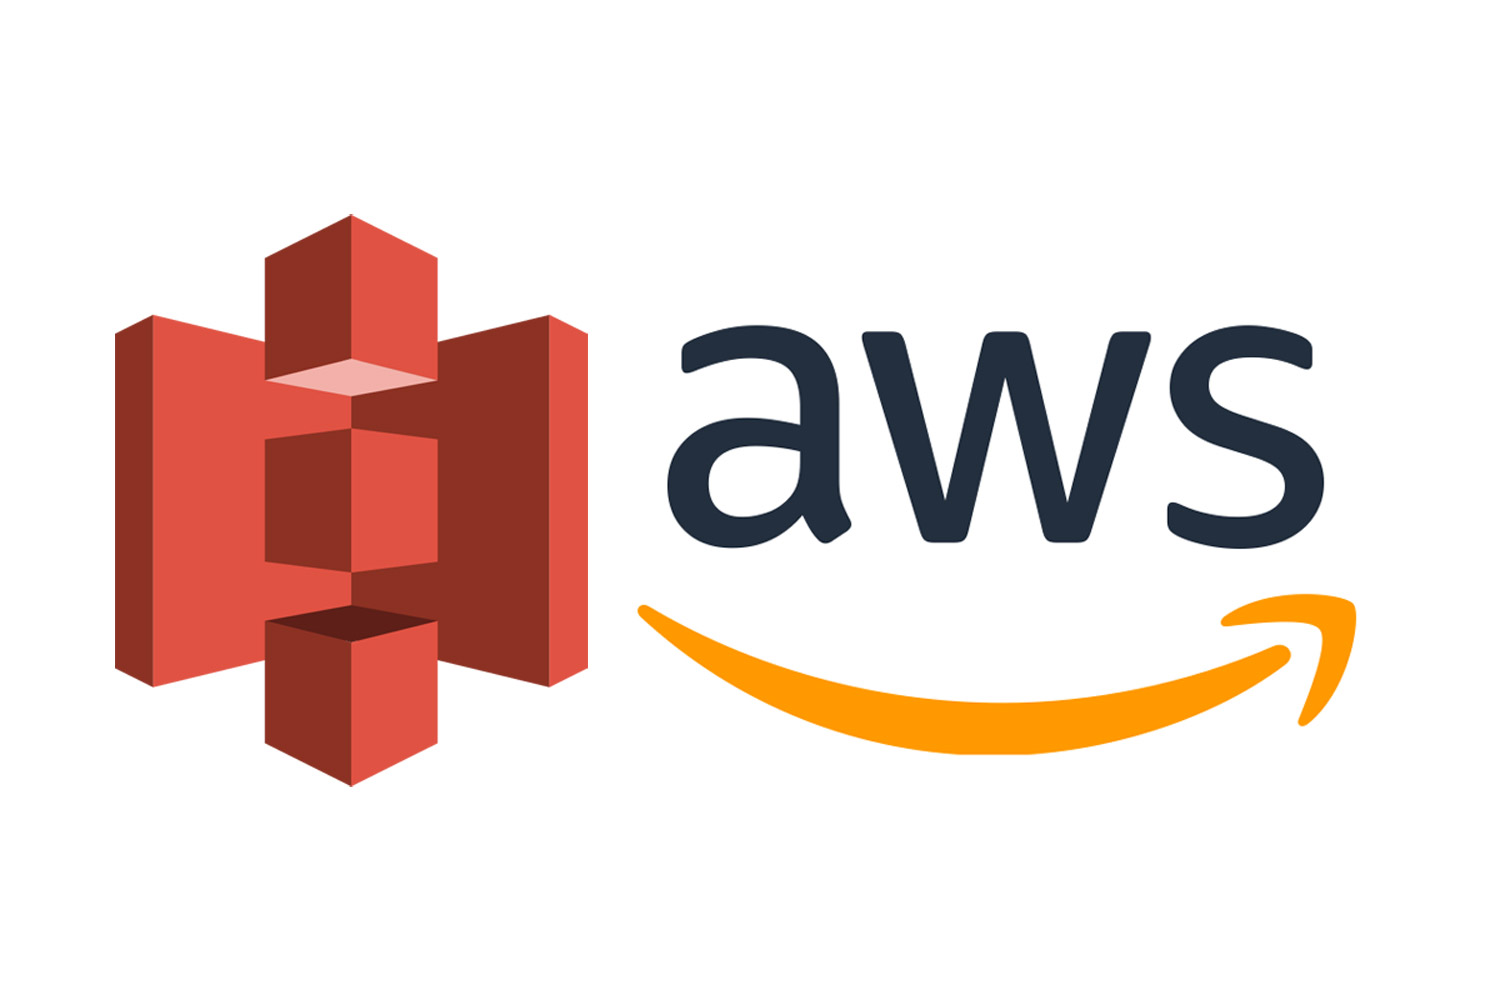 upload image to aws s3